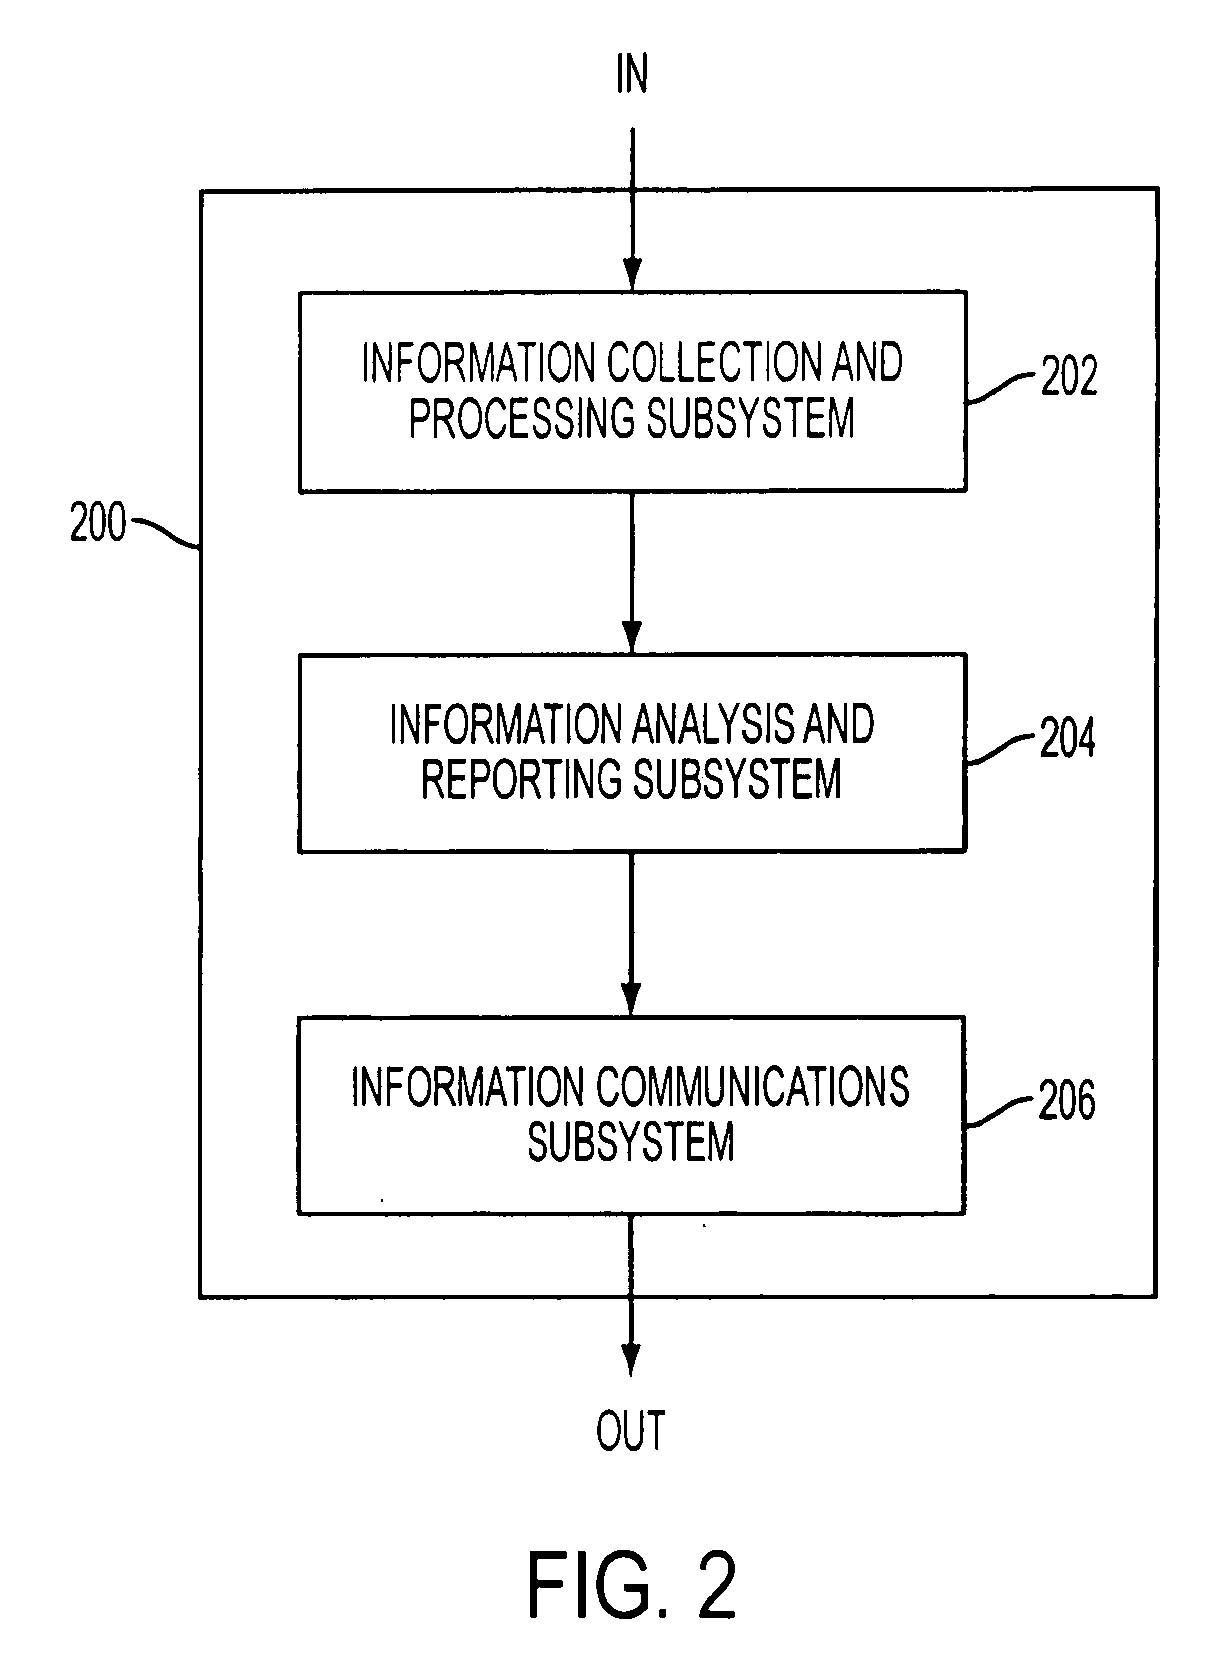 System and method for detecting, collecting, analyzing, and communicating event-related information